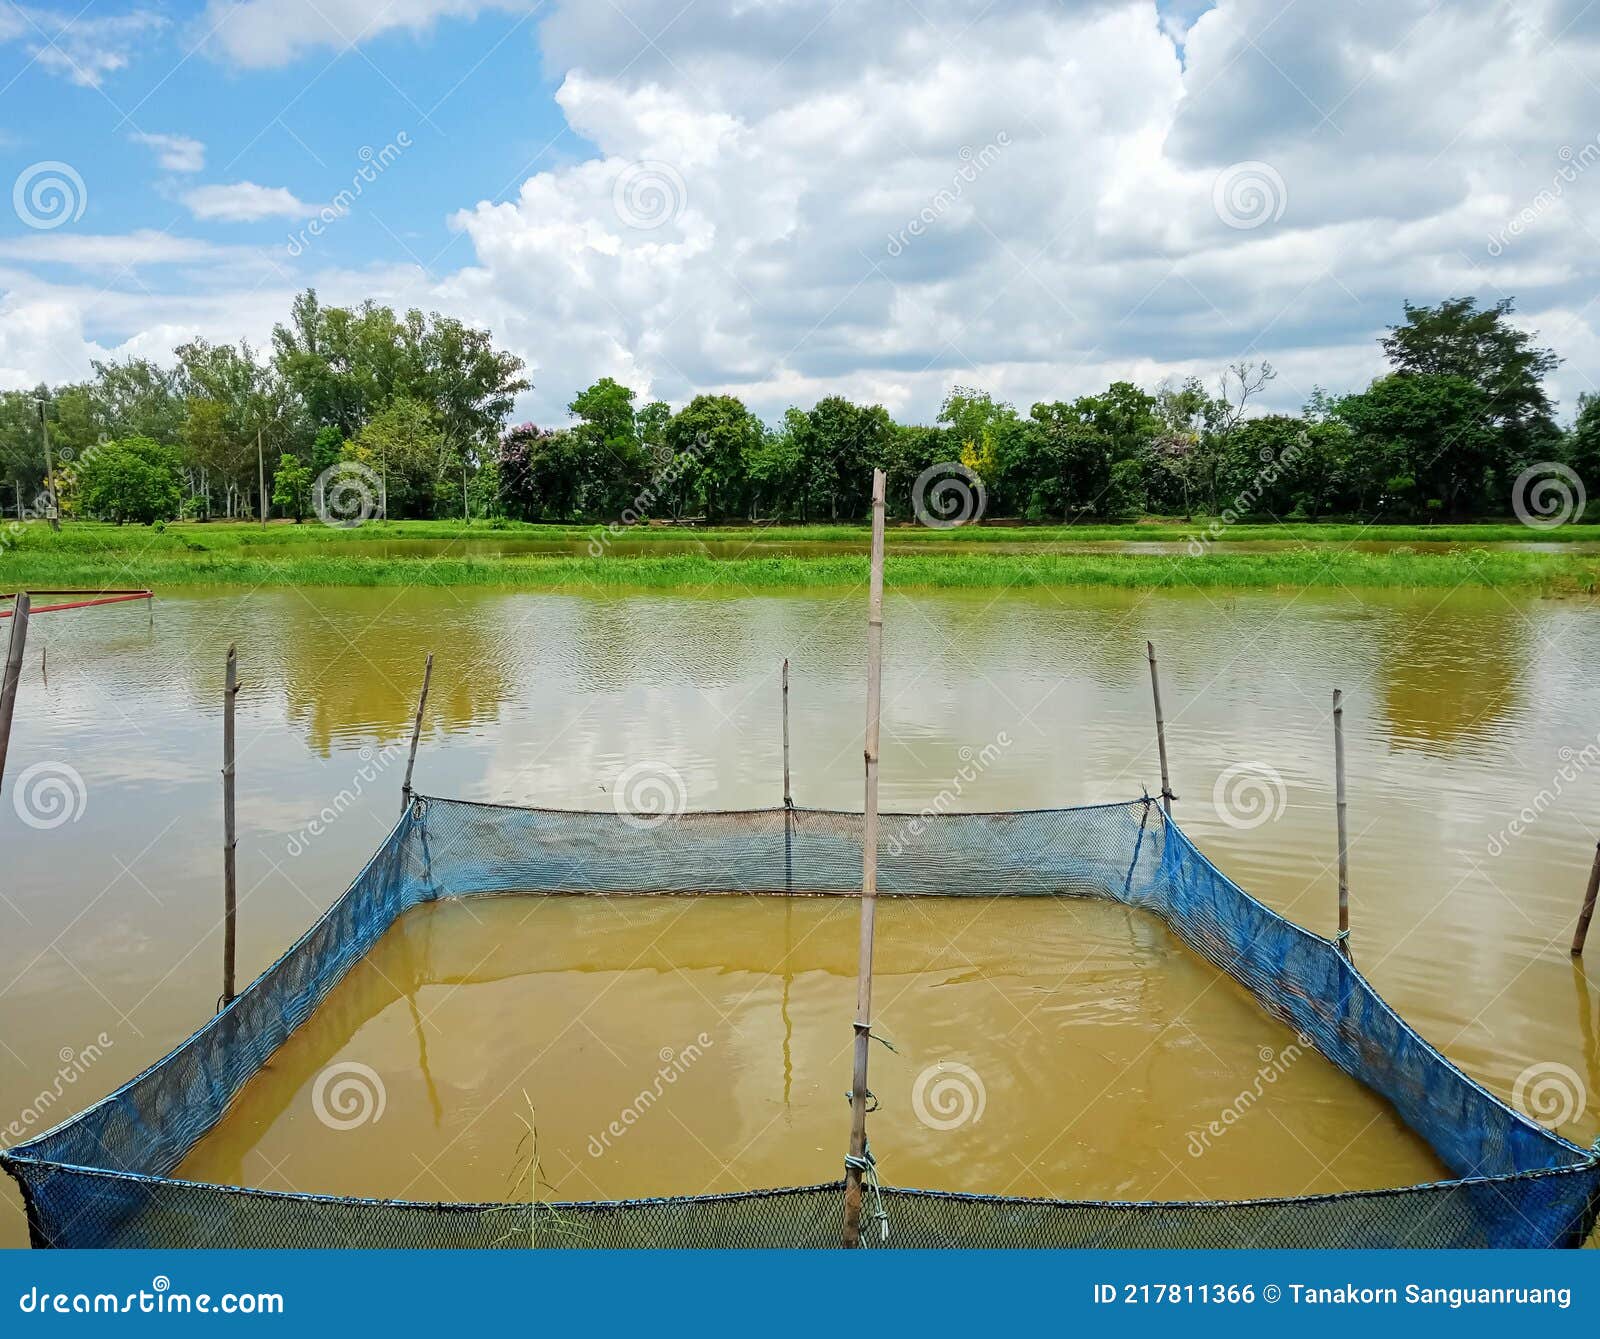 The Tilapia Fish Cage Culture Stock Photo - Image of fishery, asia:  217811366